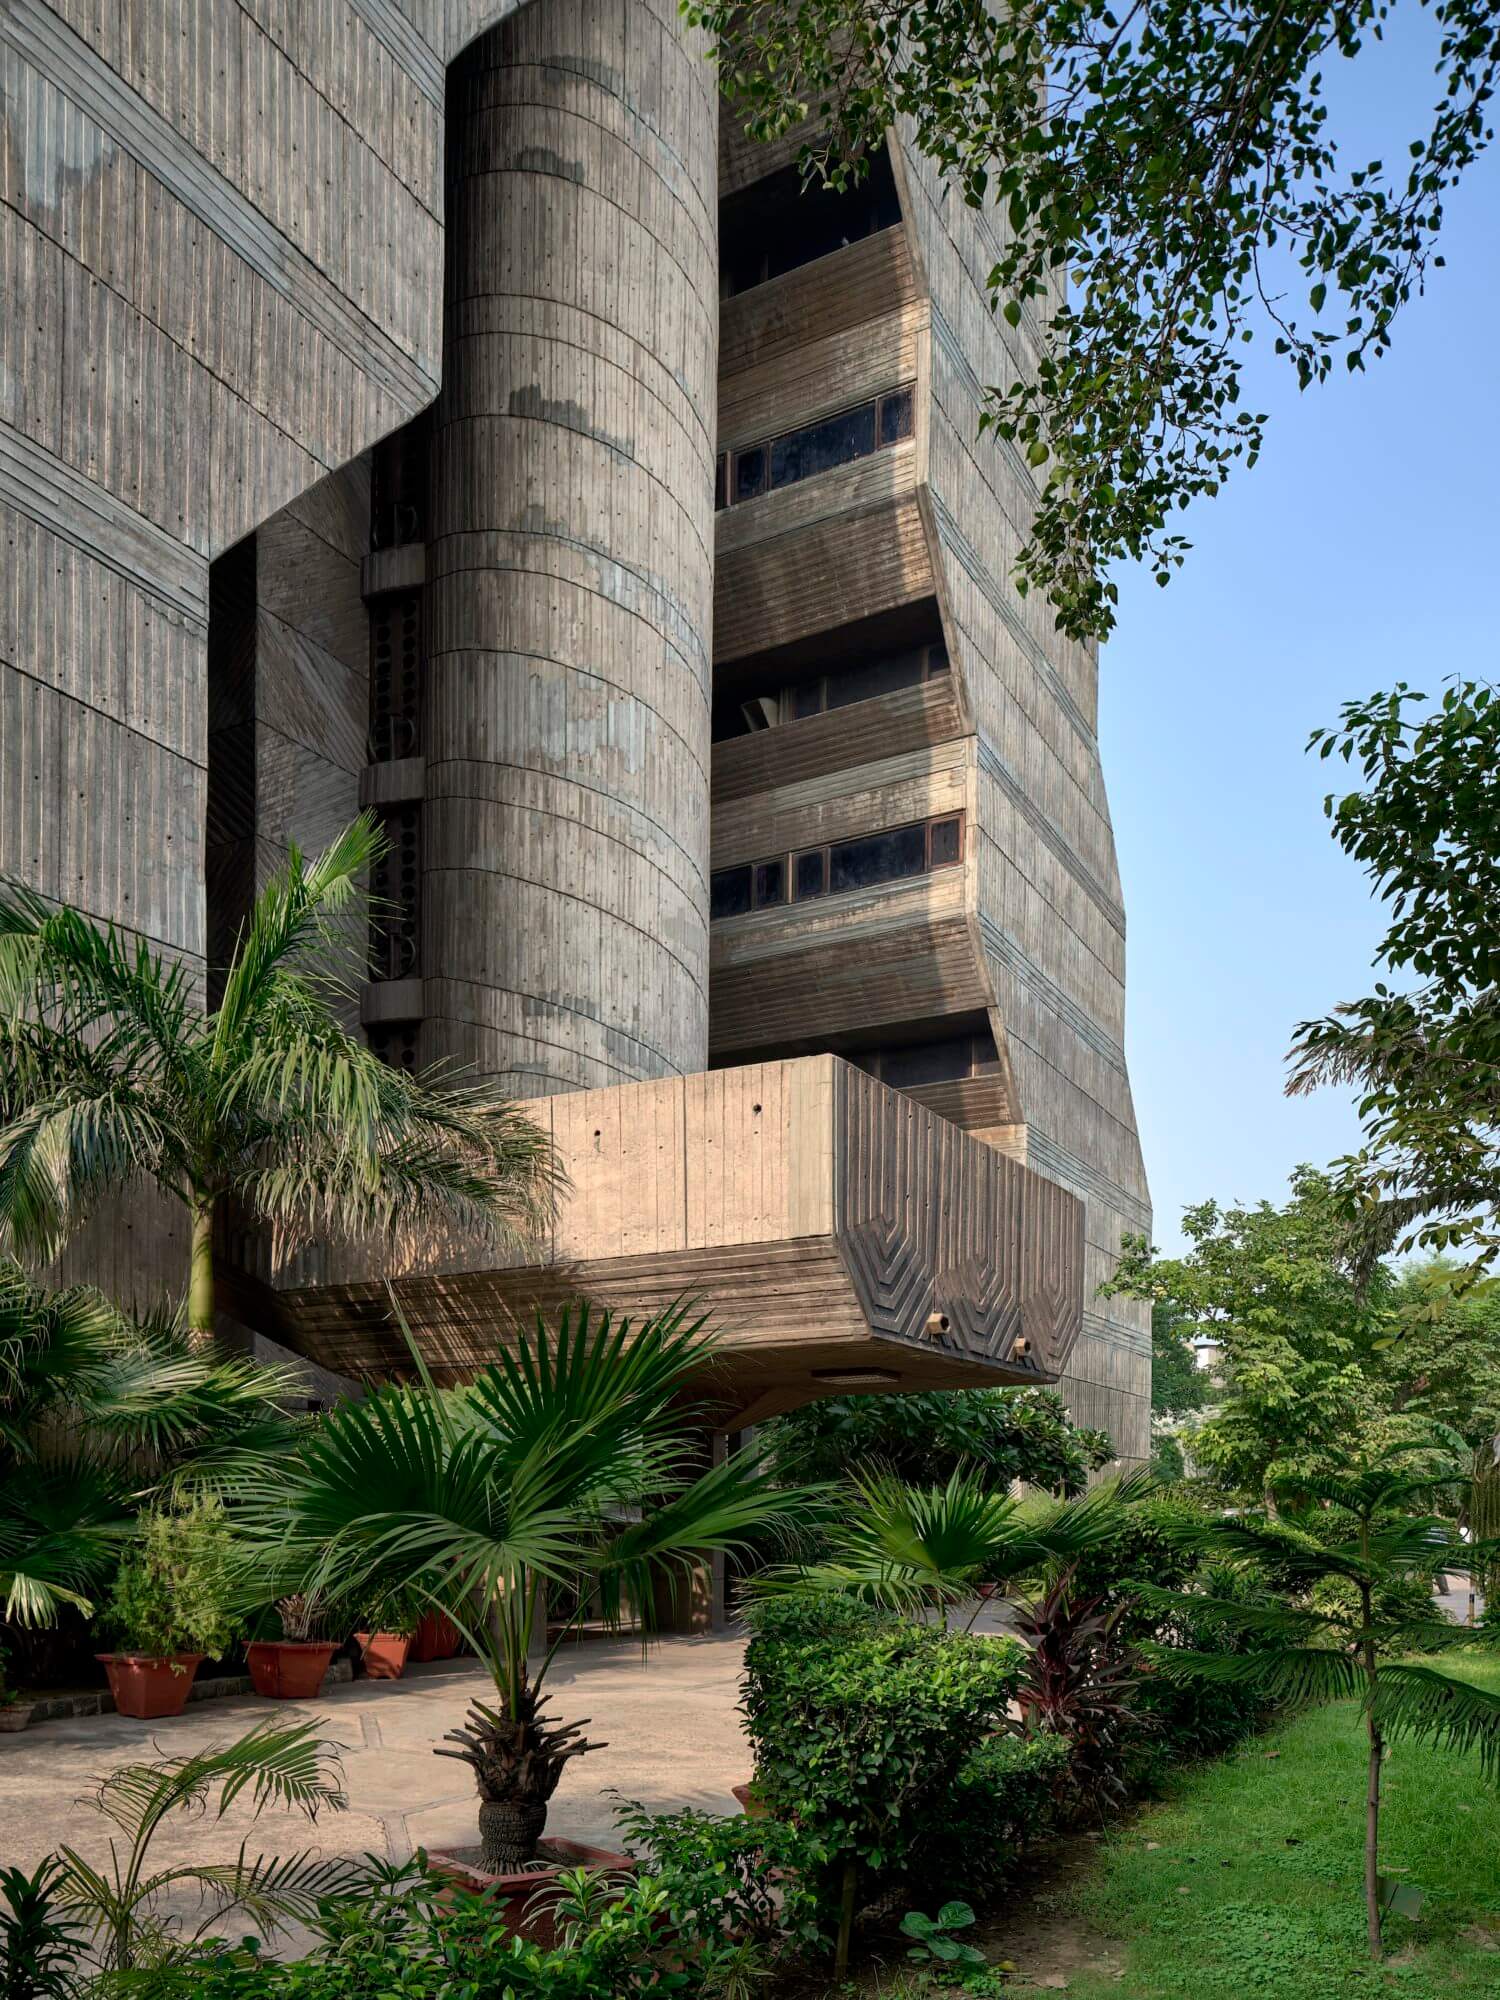 photograph depicting the exterior of an office tower clad in concrete with few windows